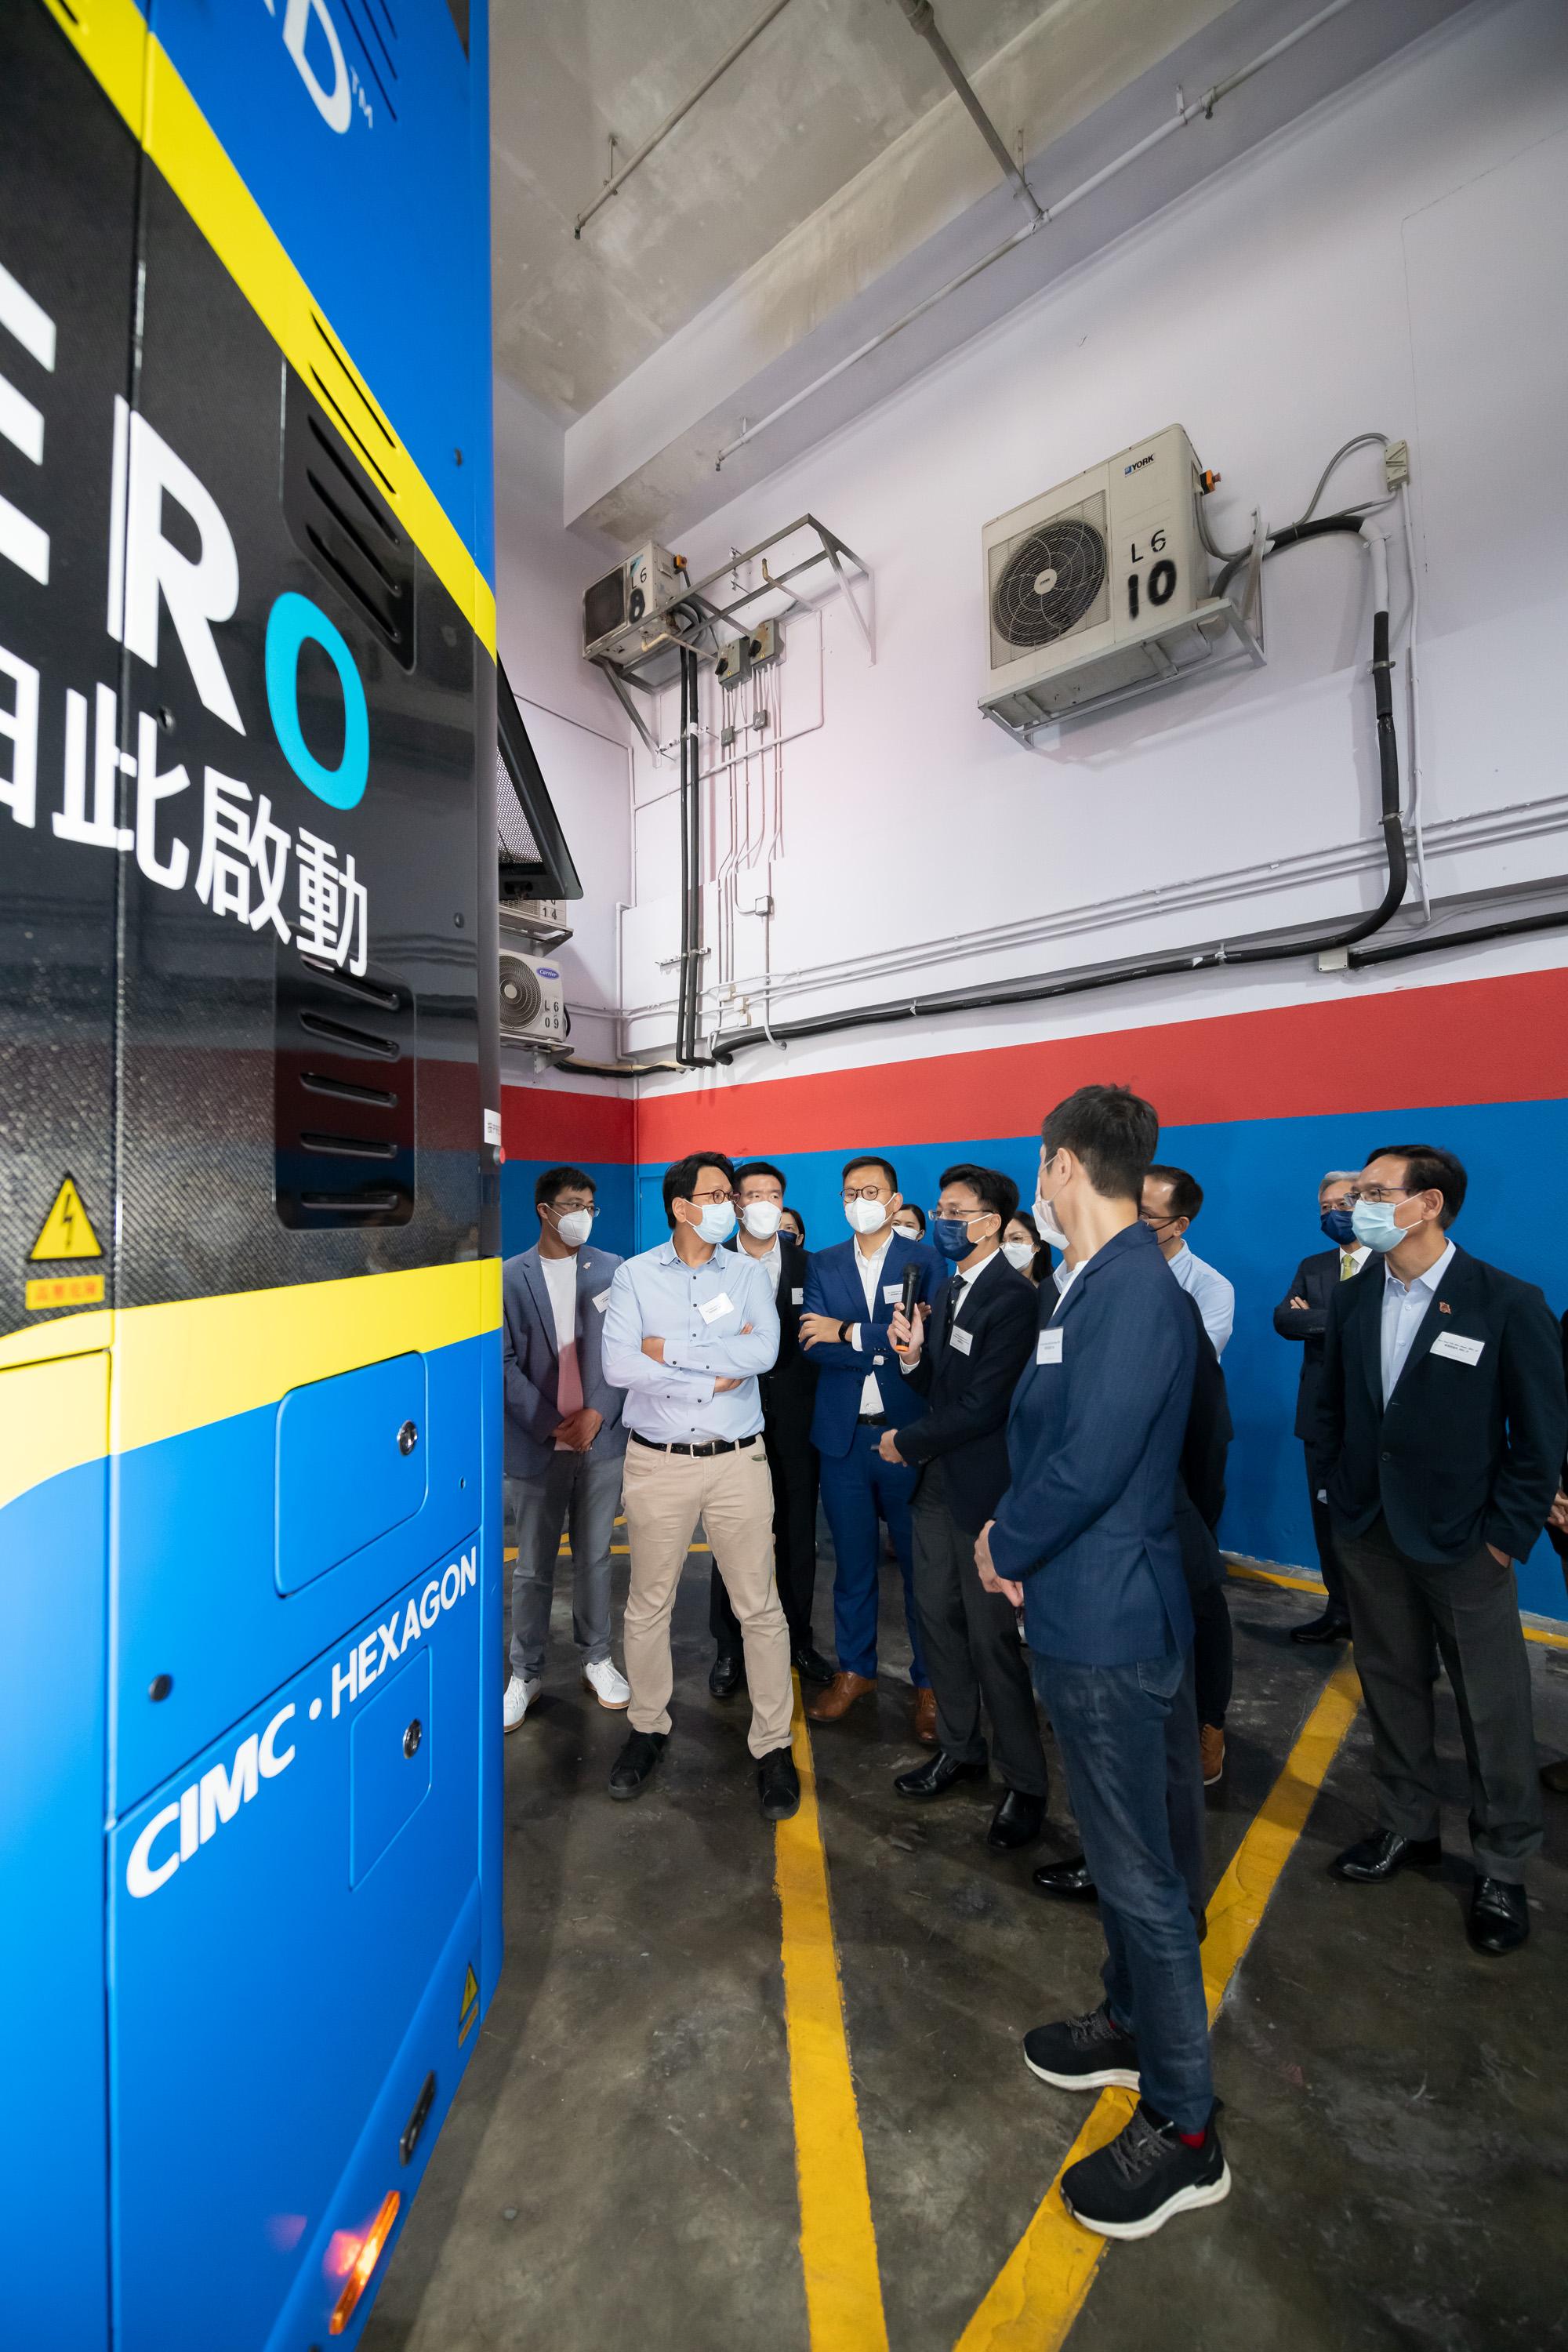 The Legislative Council (LegCo) Panel on Transport visited the Citybus Limited (Citybus) Headquarter today (August 19) to observe their facilities, including the world’s first tri-axle hydrogen fuel cell double deck bus. Photo shows LegCo Members receiving a briefing by a representative of Citybus on the infrastructure required for the hydrogen fuel cell double deck bus.